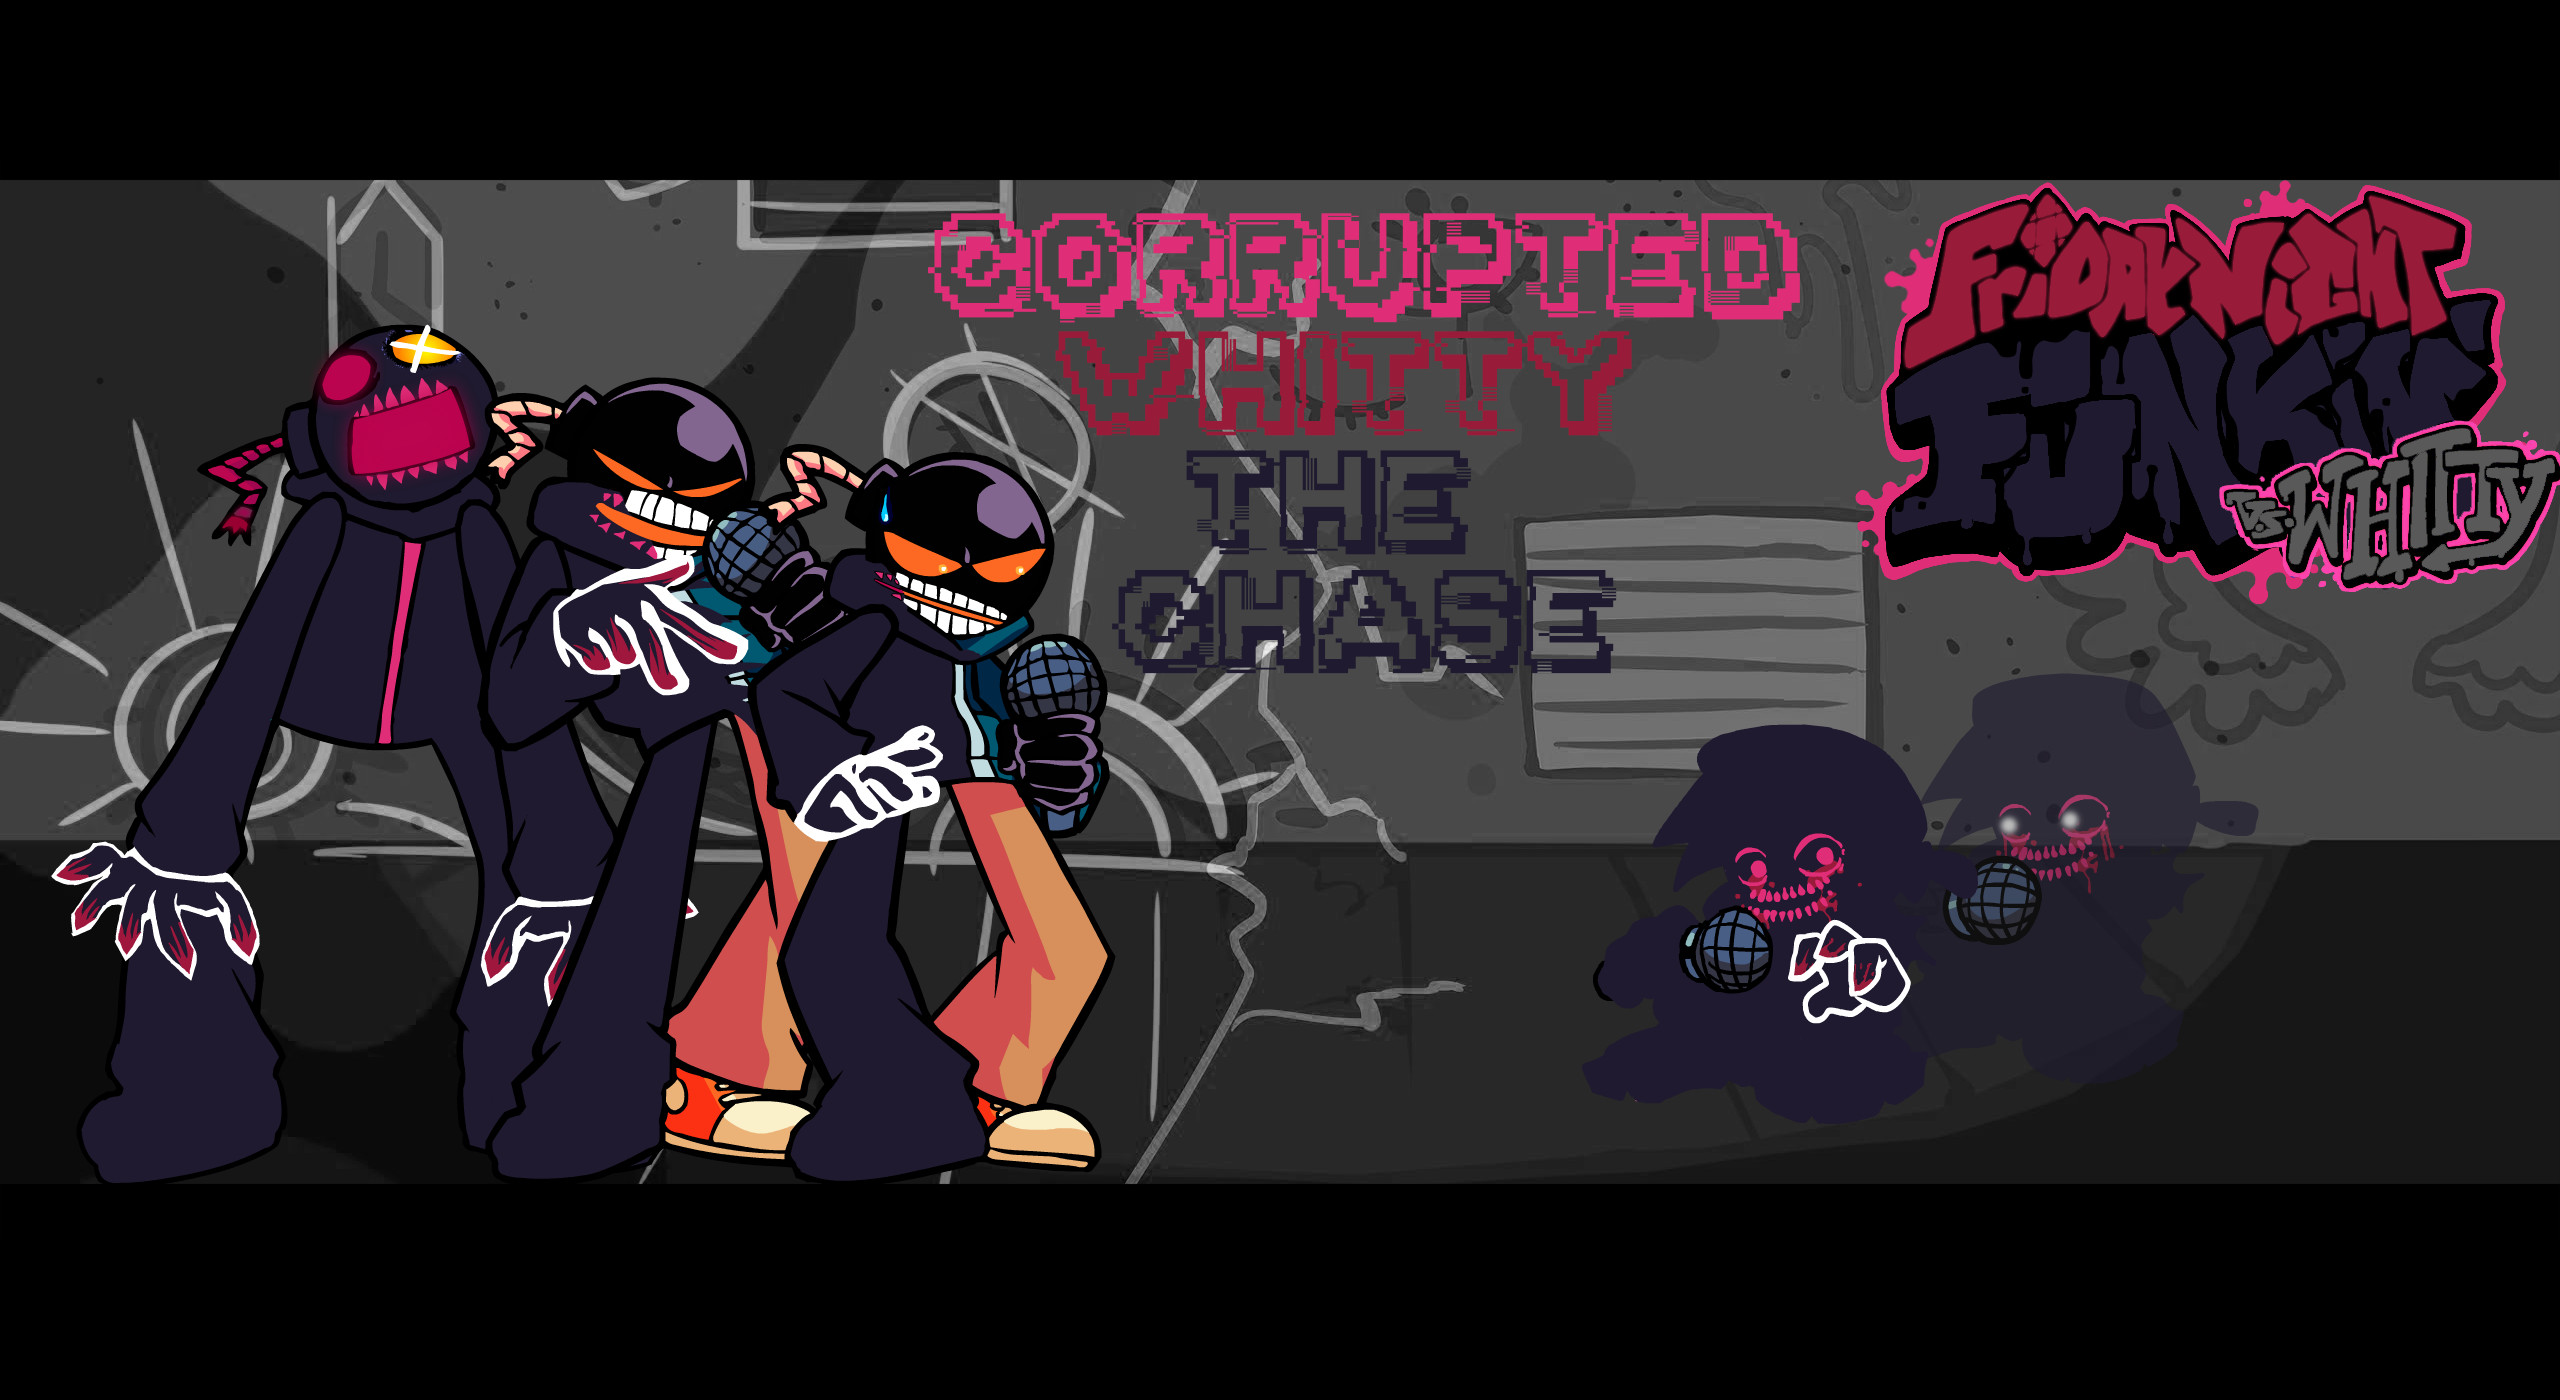 Мод corruption. Whitty corruption Mod. FNF Уитти заражение. Corrupted Whitty FNF. ФНФ мод corruption.